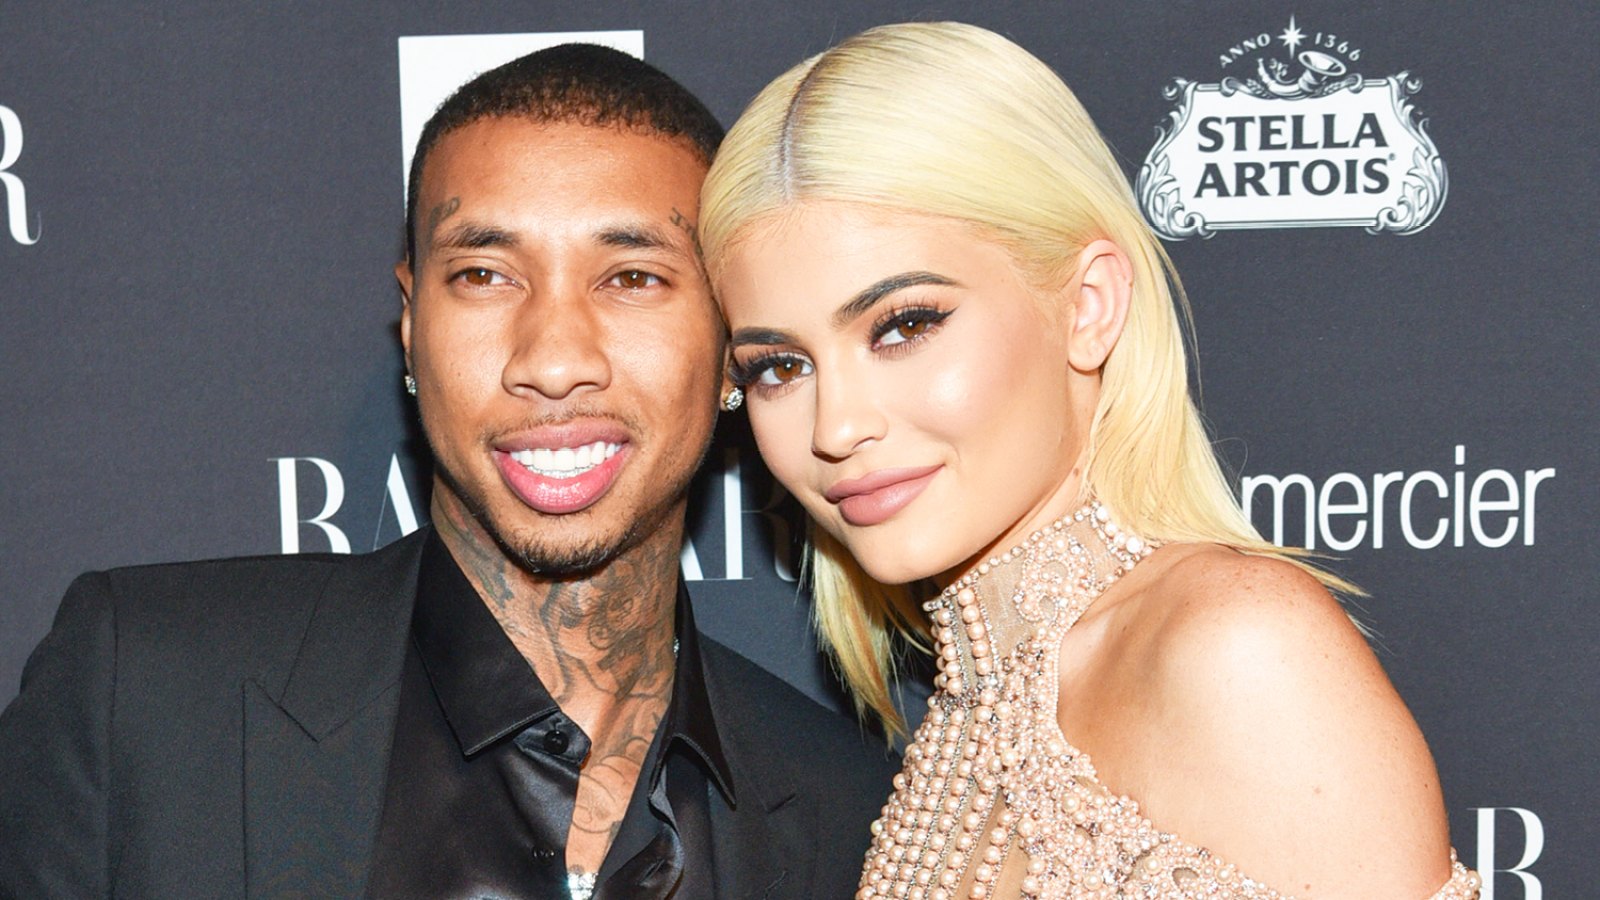 Tyga and Kylie Jenner attend The Worldwide Editors of Harper's Bazaar Celebrate Icons by Carine Roitfeld at The Plaza Hotel on September 9, 2016 in New York City